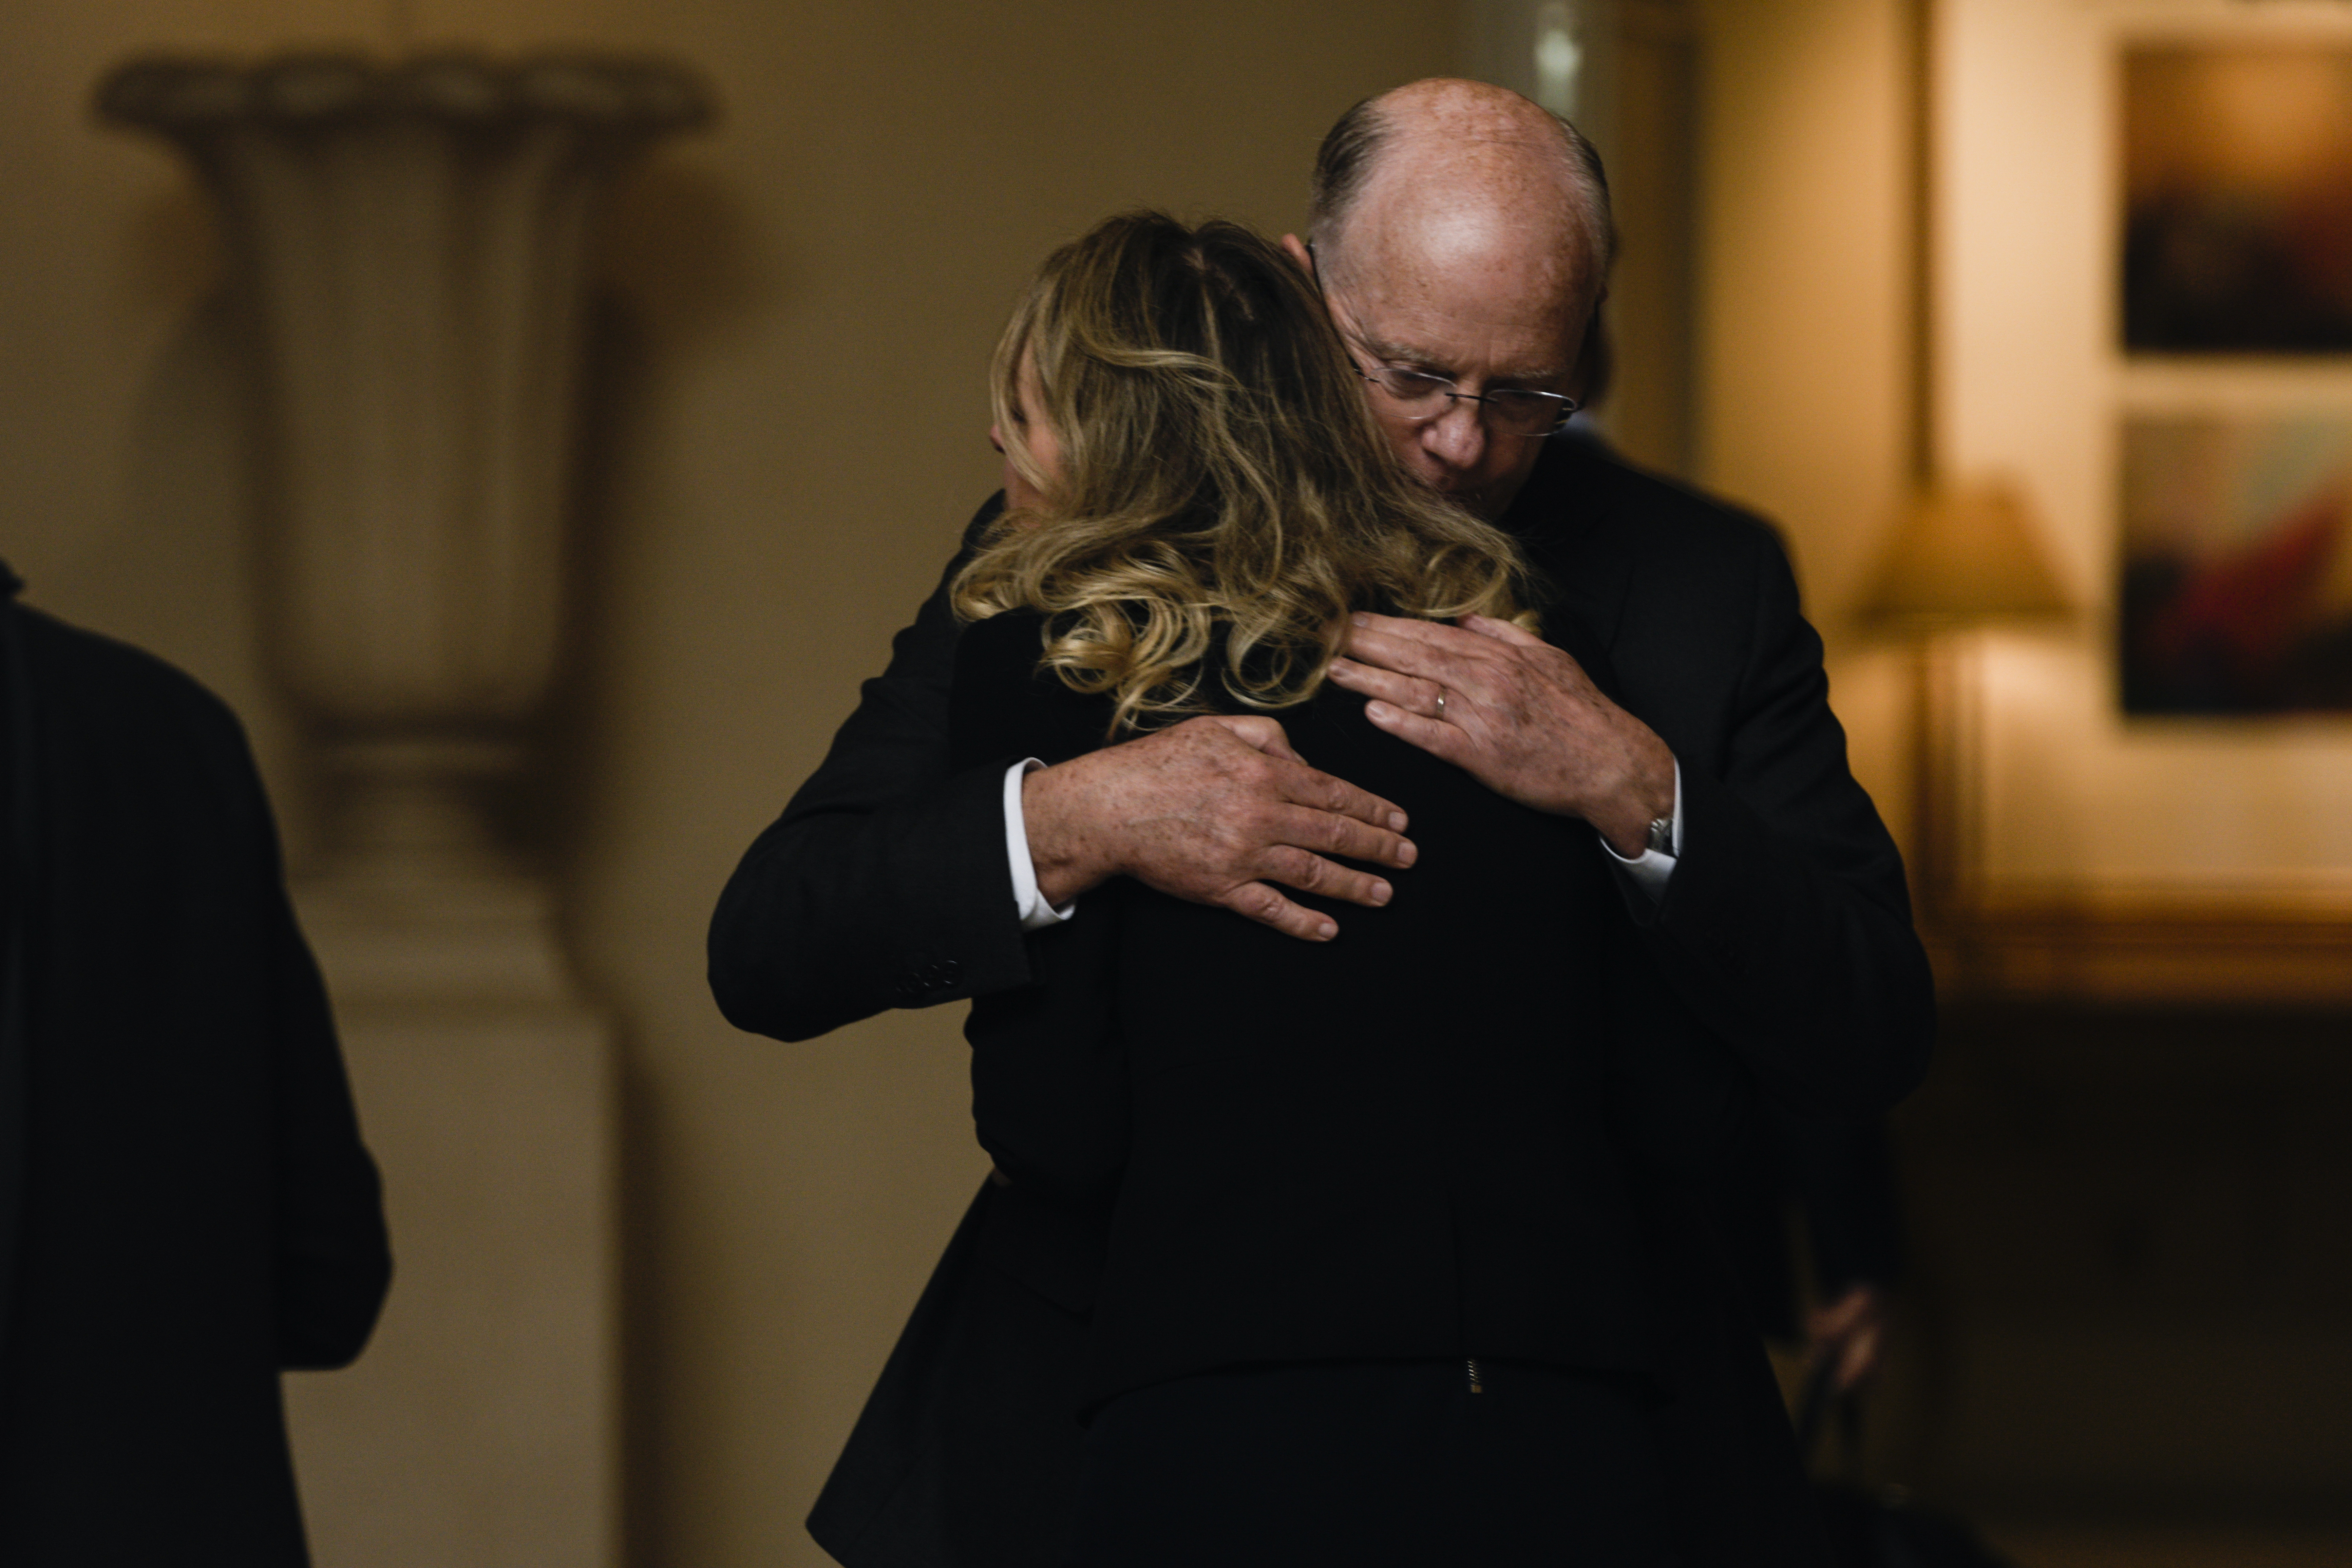 Former Theranos CEO Elizabeth Holmes hugs her father Christian Holmes IV after returning to her hotel following a hearing at the Robert E. Peckham U.S. Courthouse on March 17, 2023 in San Jose, California. | Source: Getty Images